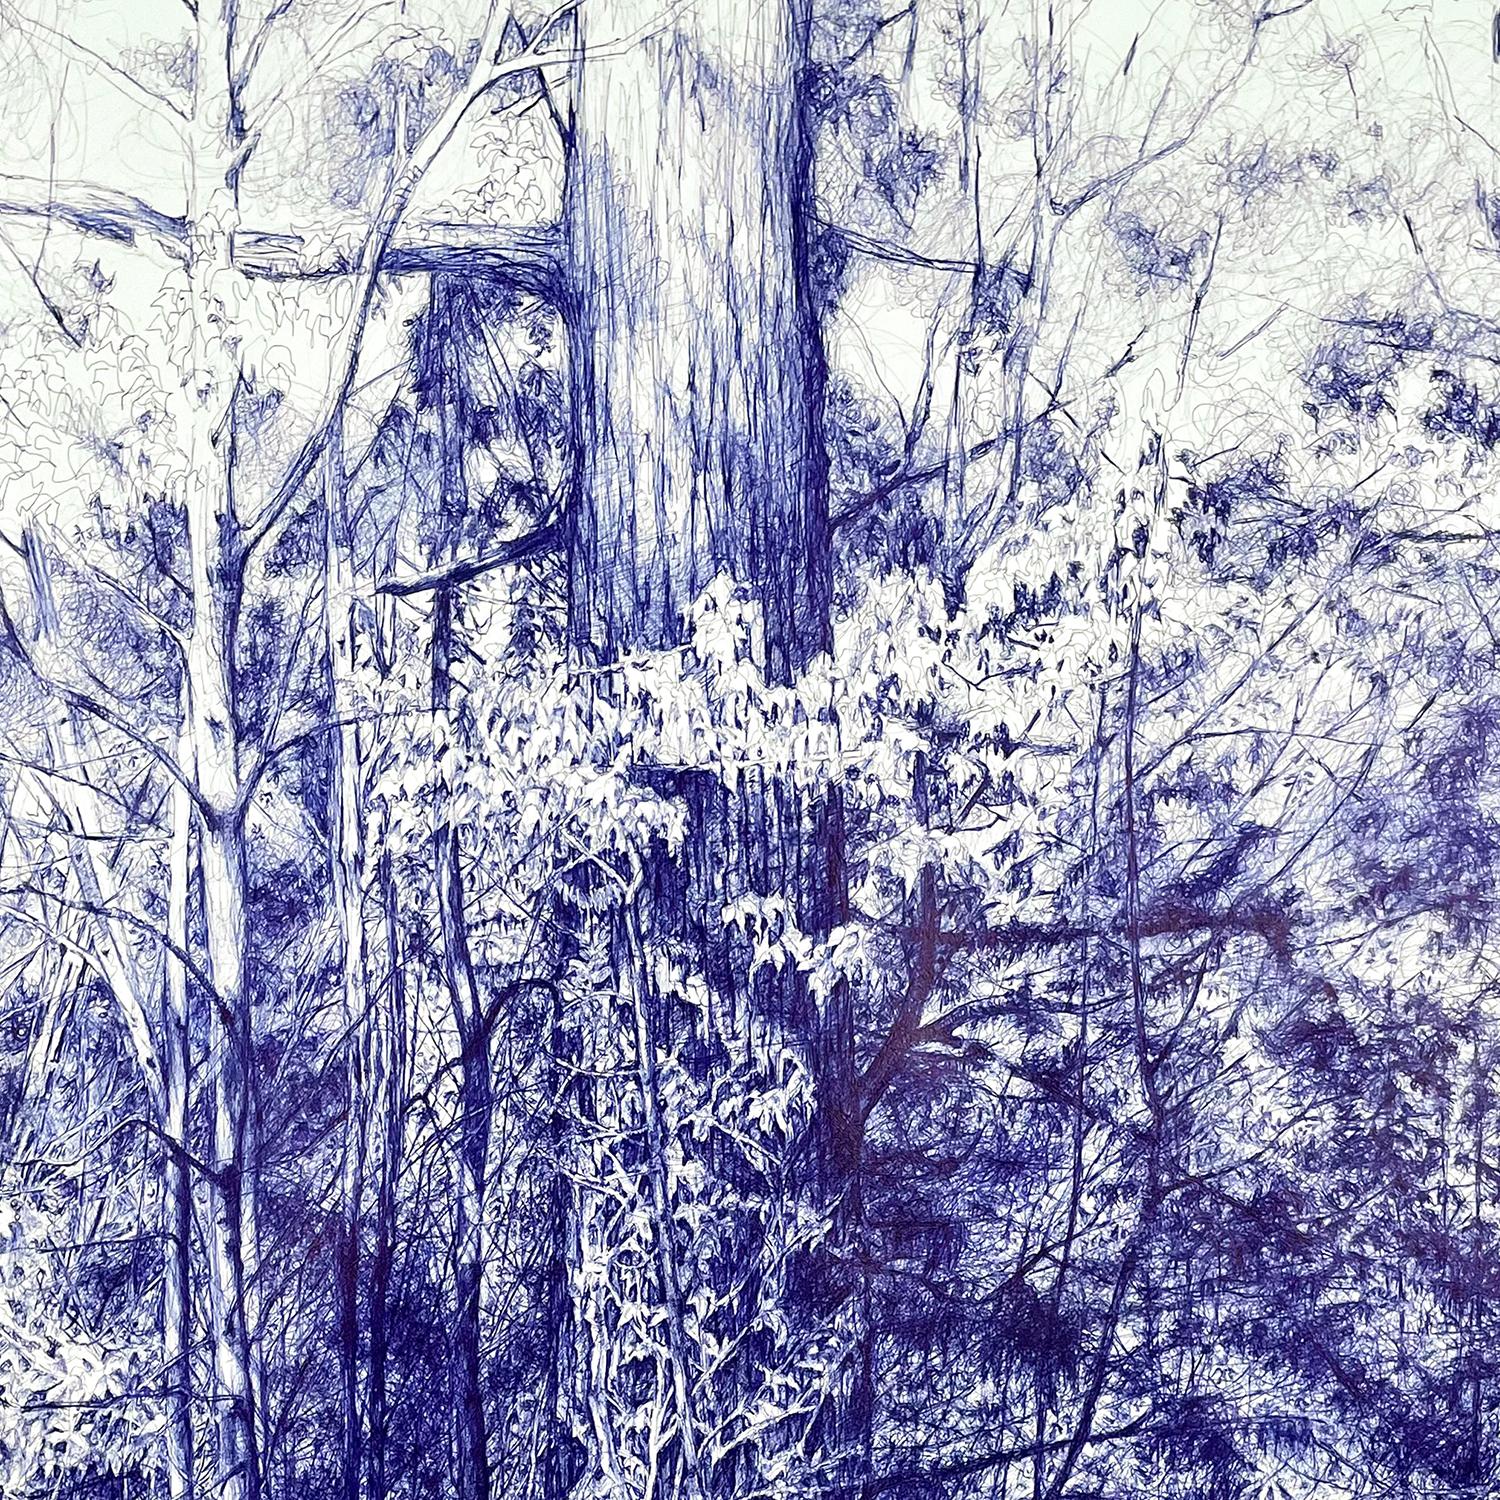 Oracle of Bastet (Blue Ballpoint Pen Drawing of Forested Landscape with Trees), 2023
ballpoint pen on Arches paper
Image size: 40 x 30 inches
Frame size: 41.5 x 31.5 inches

To create the drawings in her latest series, Newman Boughton begins by